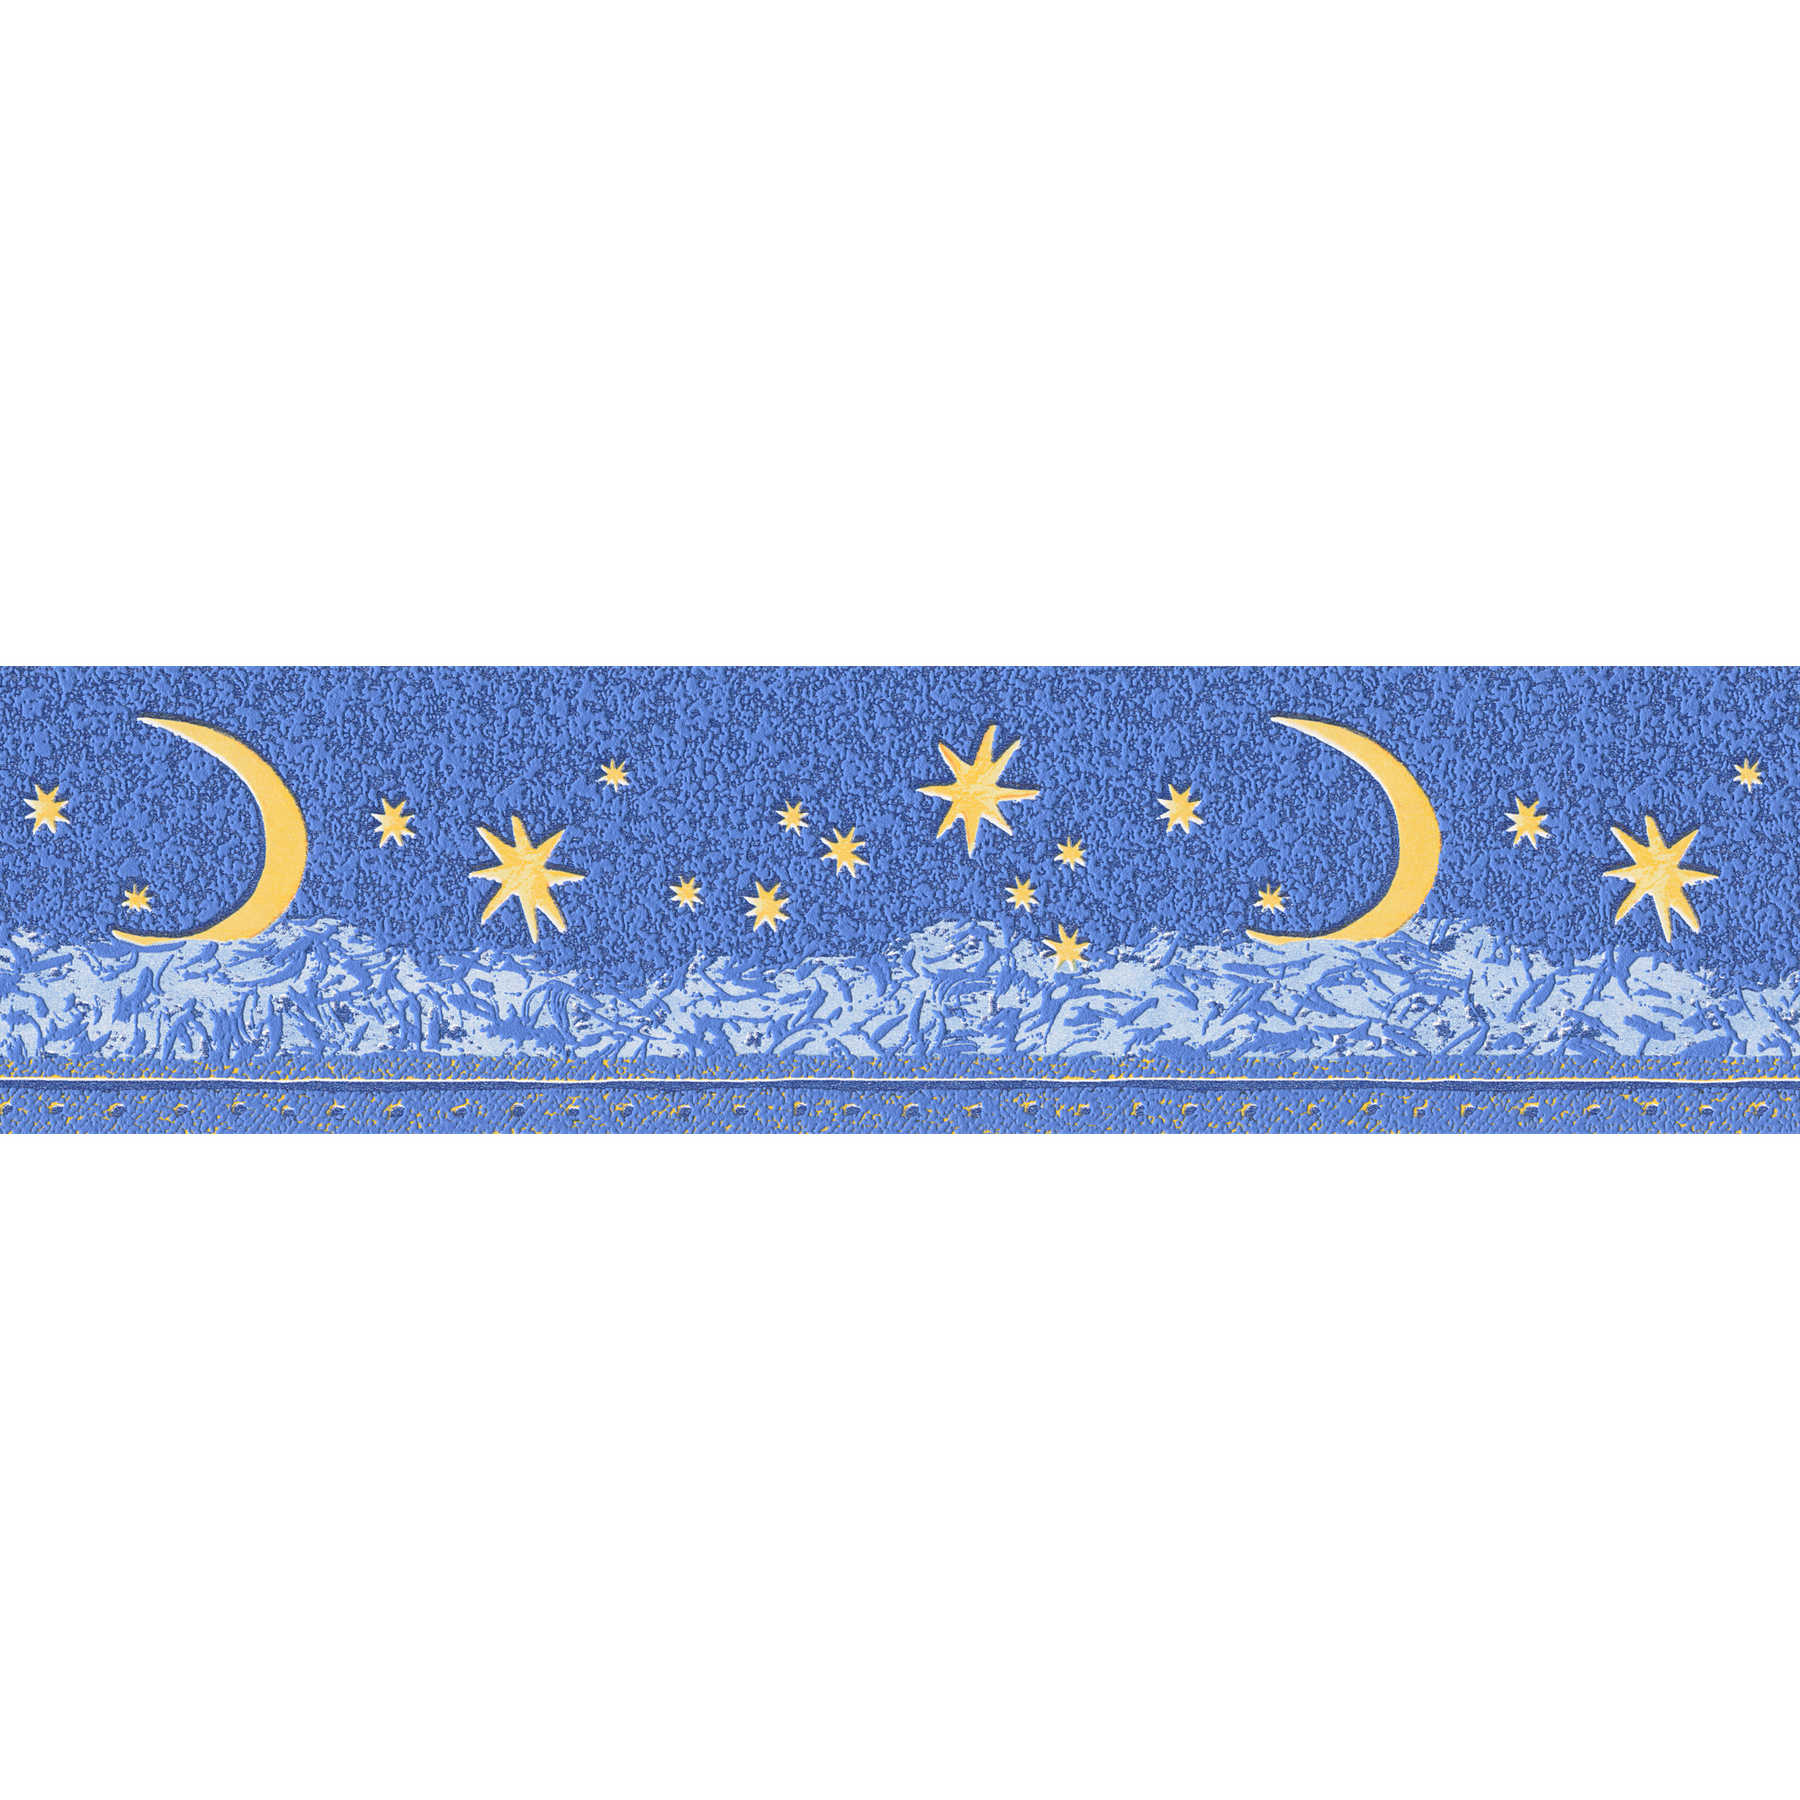         Wallpaper border with starry sky & moons - blue, yellow
    